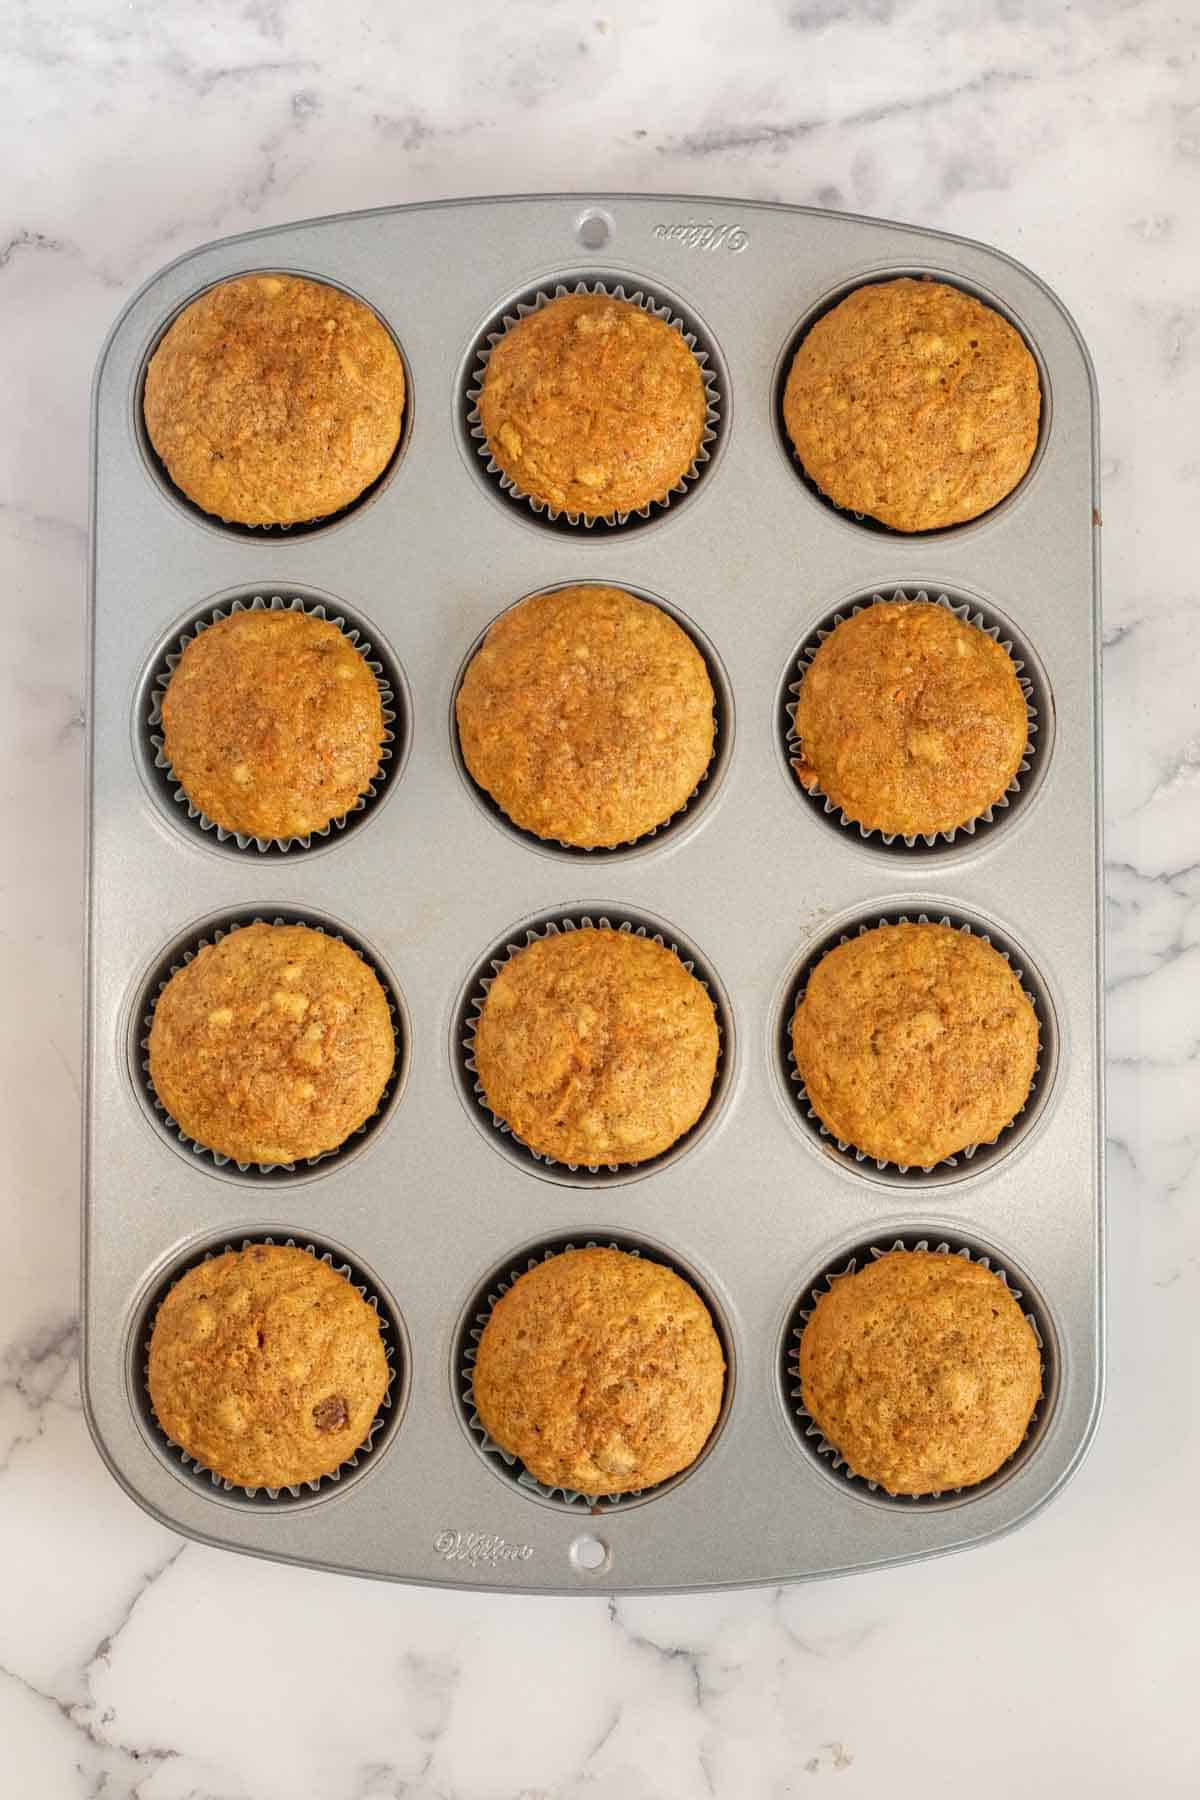 The baked cupcakes in the muffin pan.